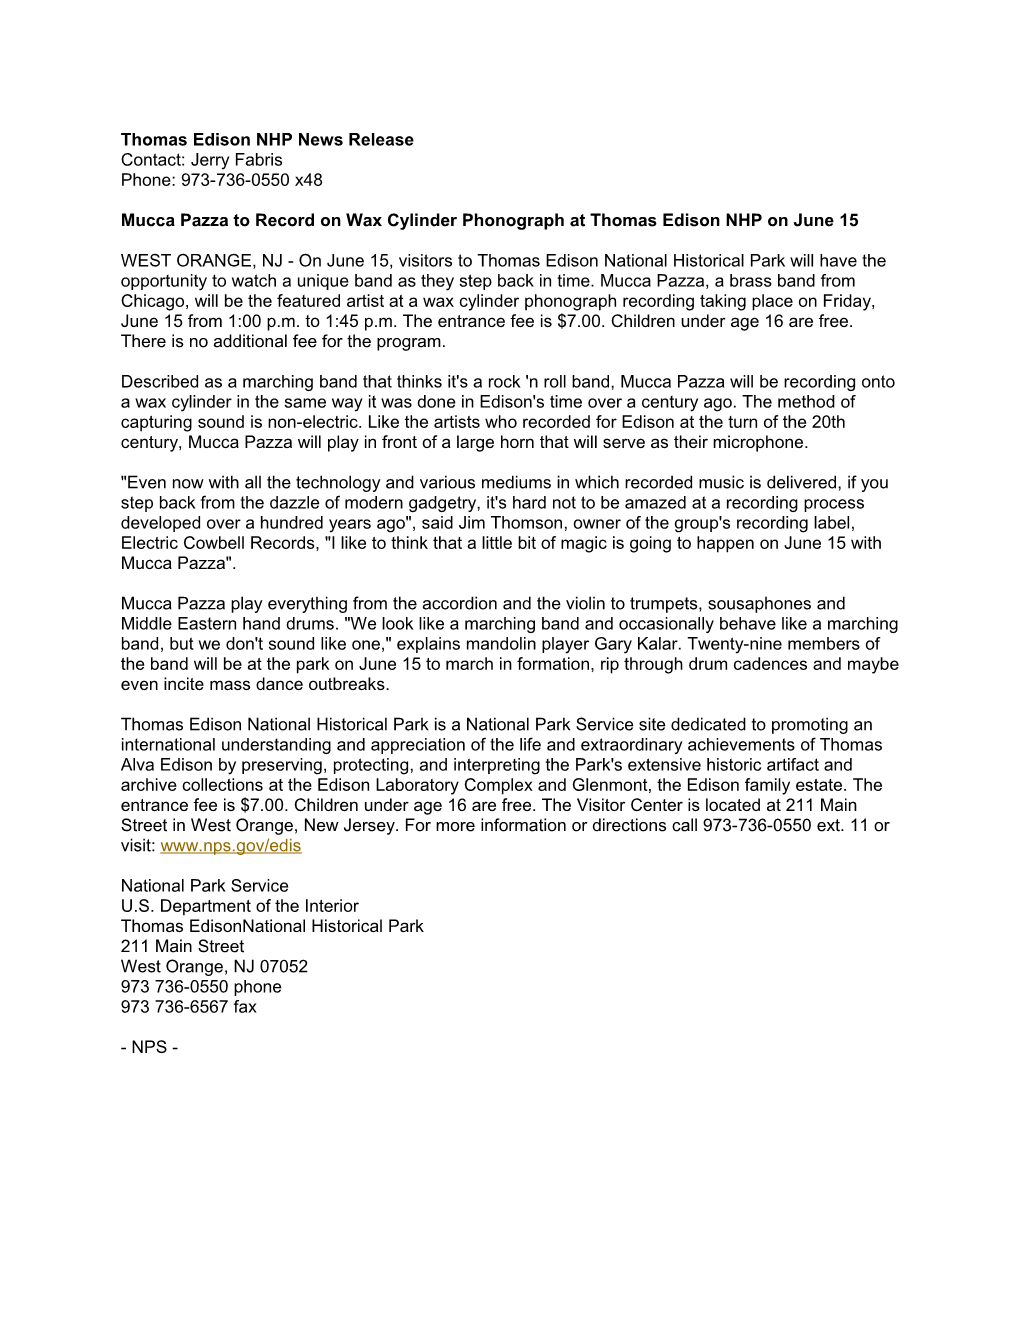 Thomas Edison NHP News Release Contact: Jerry Fabris Phone: 973-736-0550 X48 Muccapazza